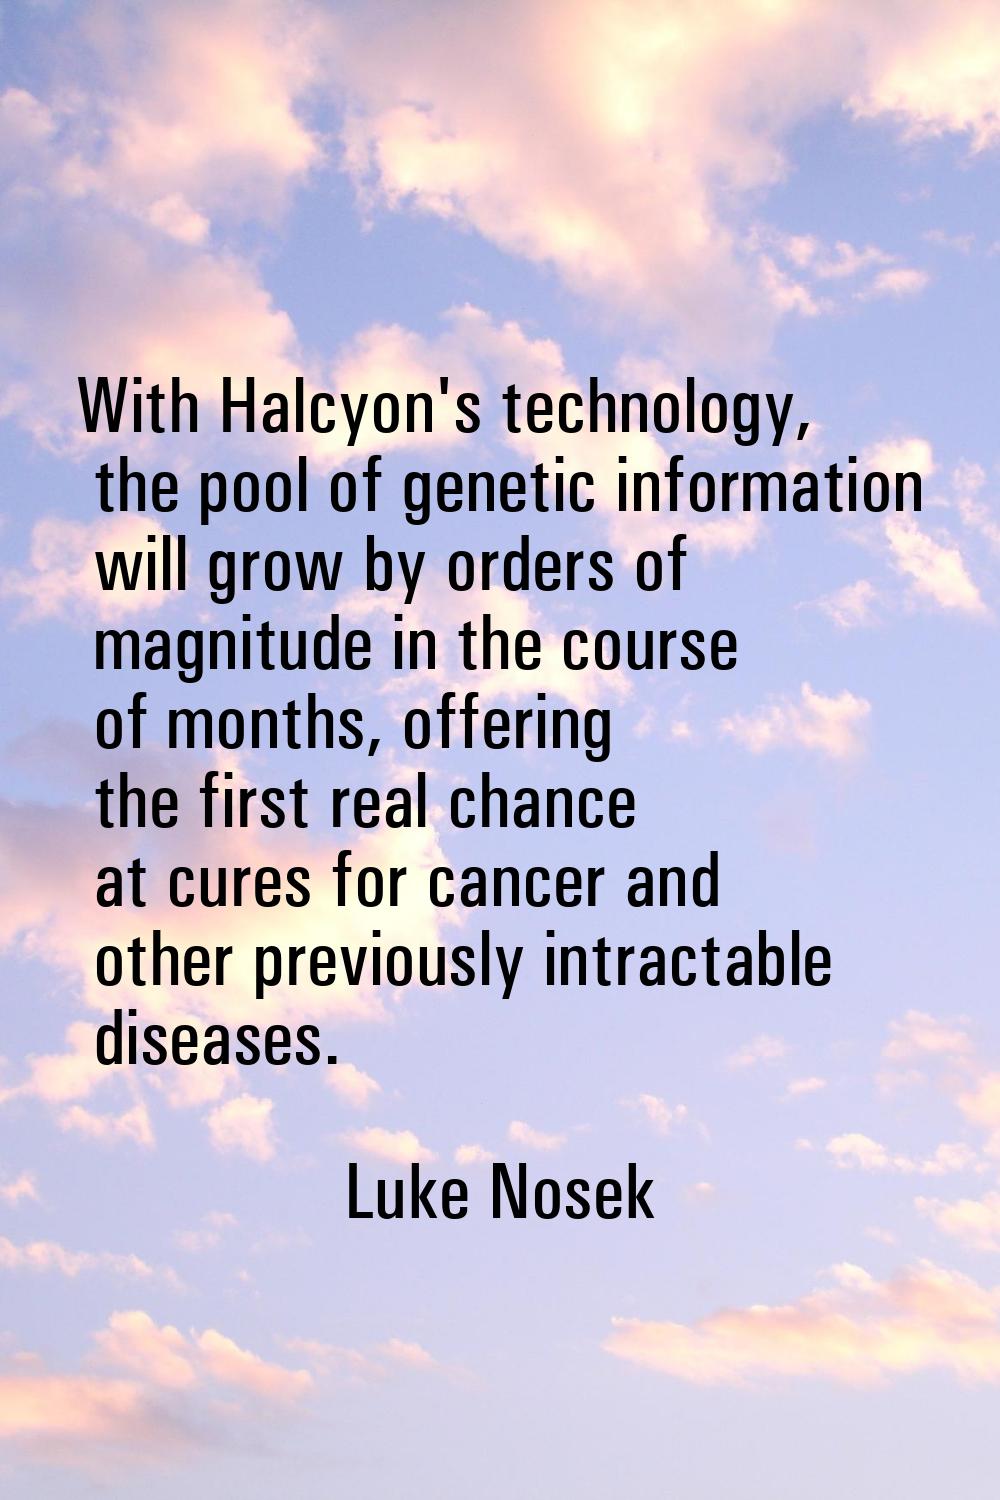 With Halcyon's technology, the pool of genetic information will grow by orders of magnitude in the 